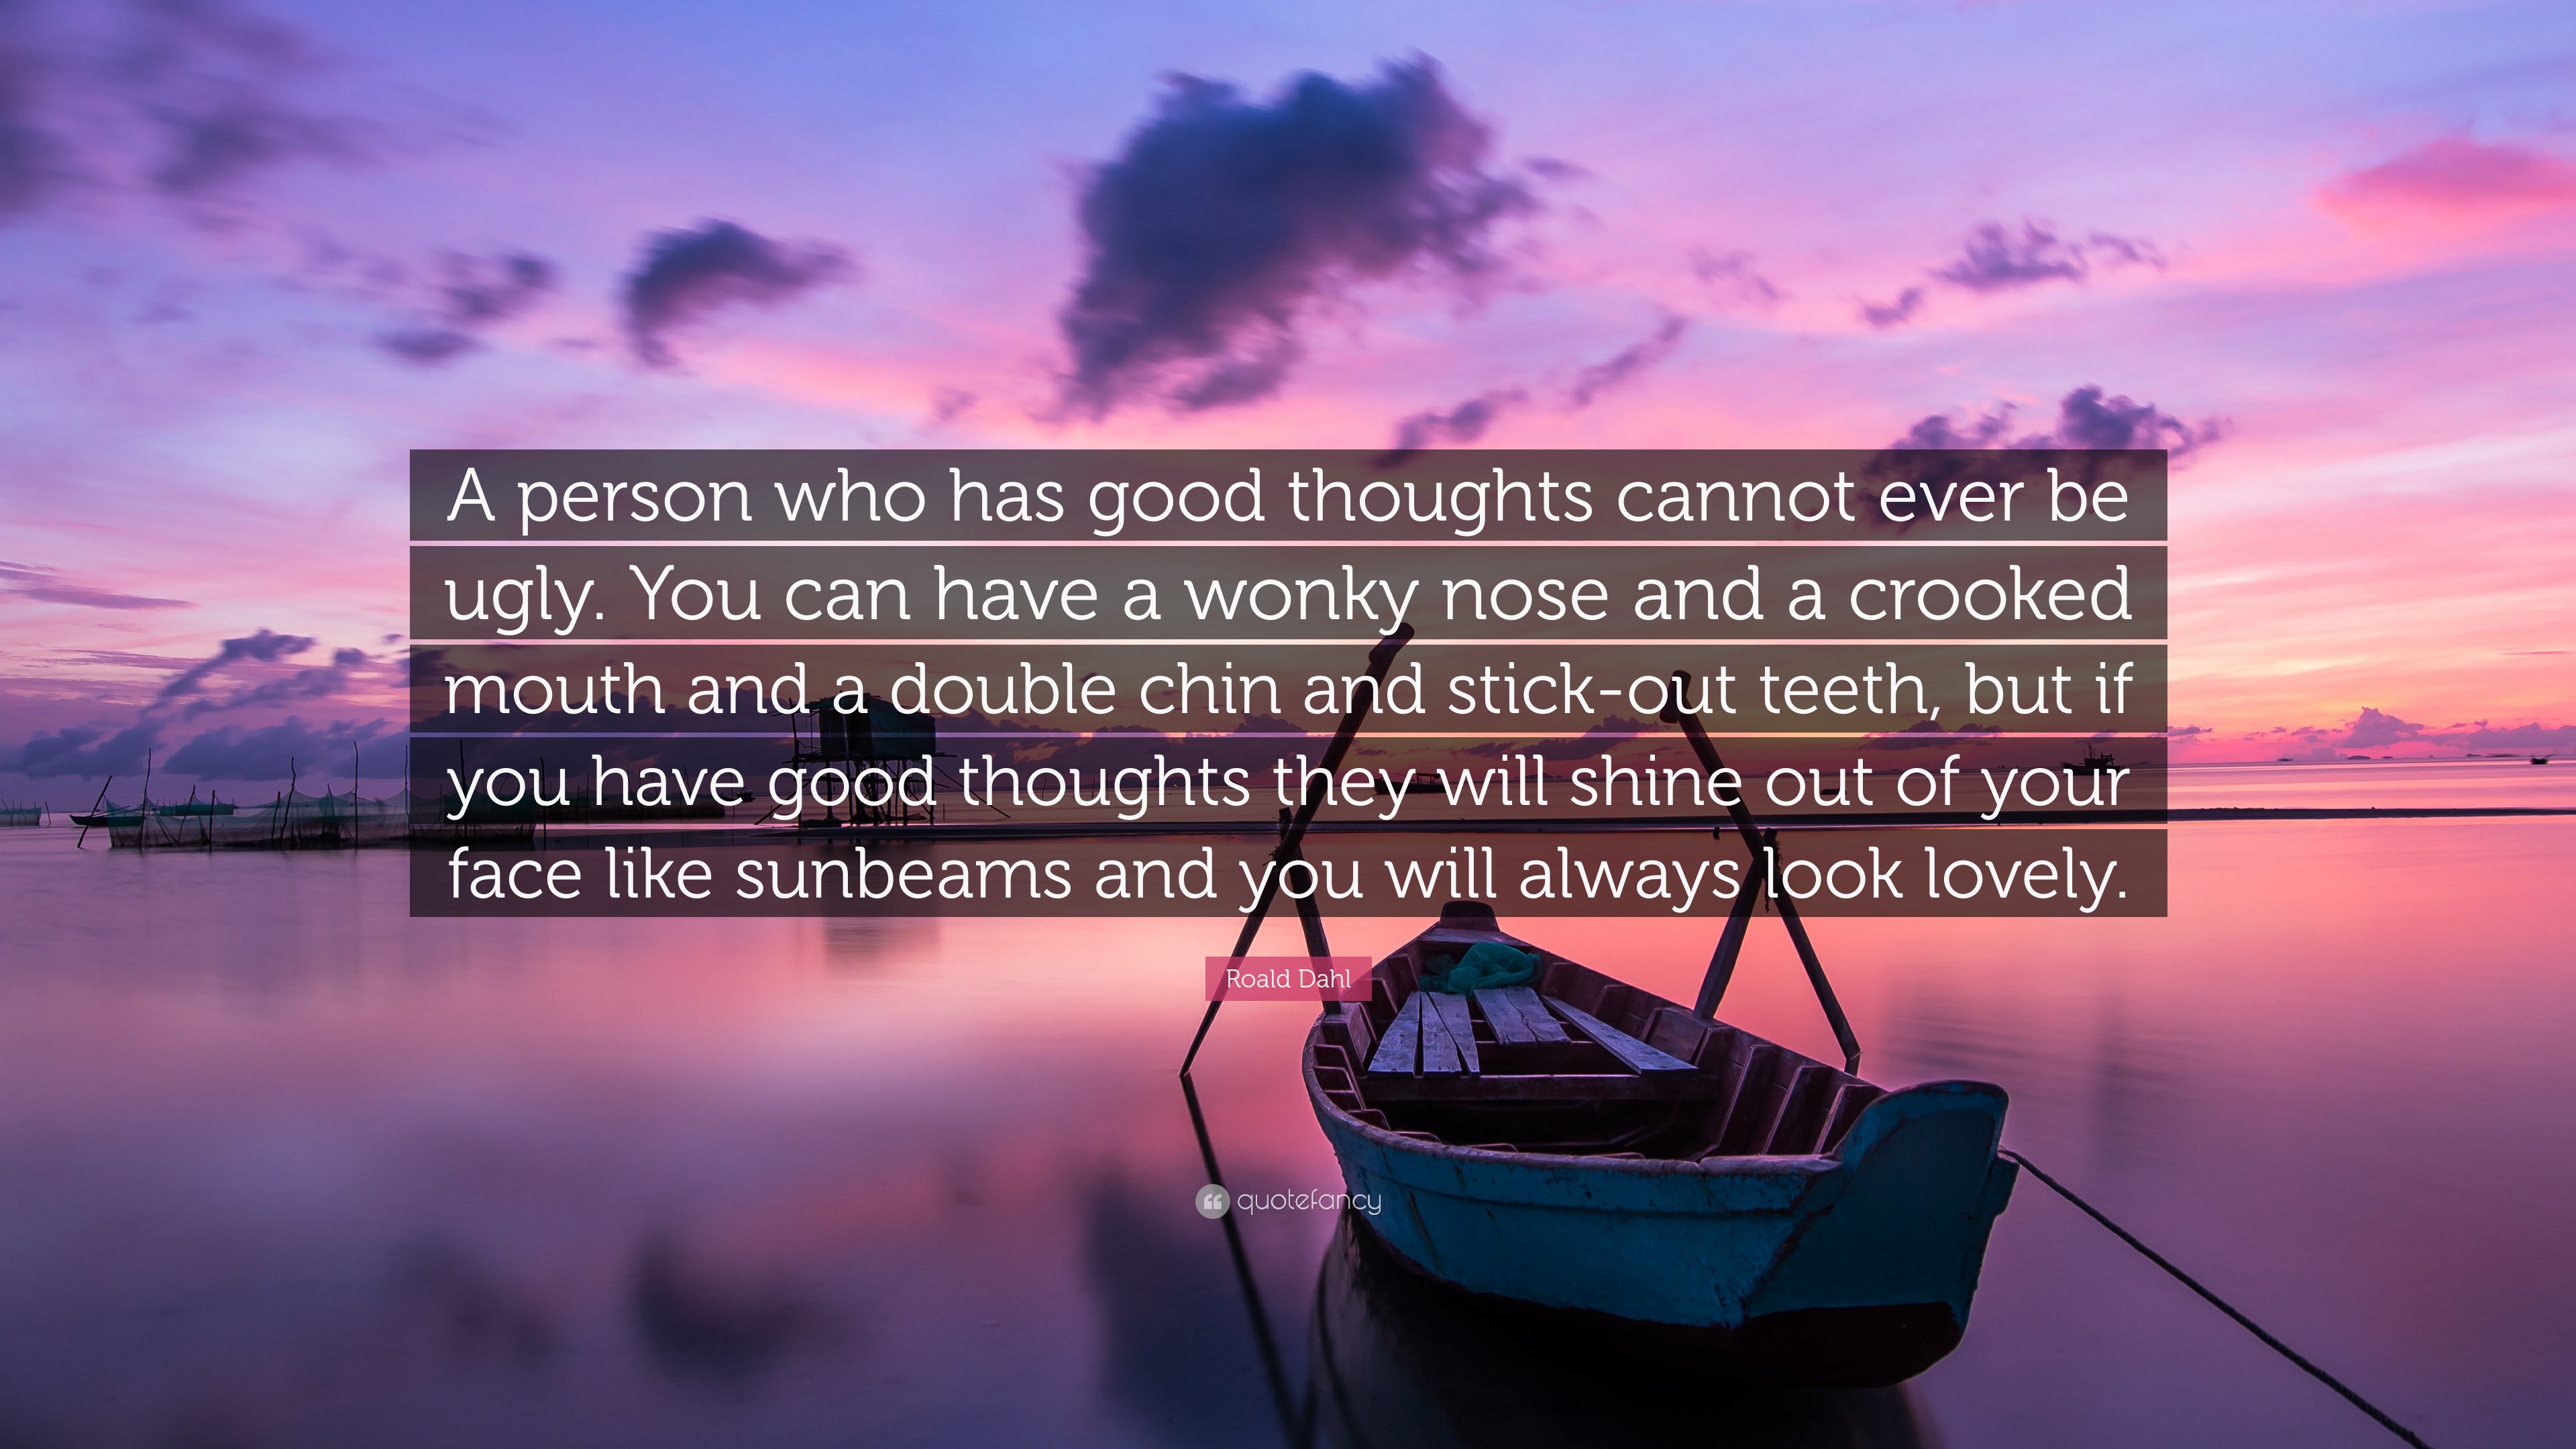 A person who has good thoughts cannot ever